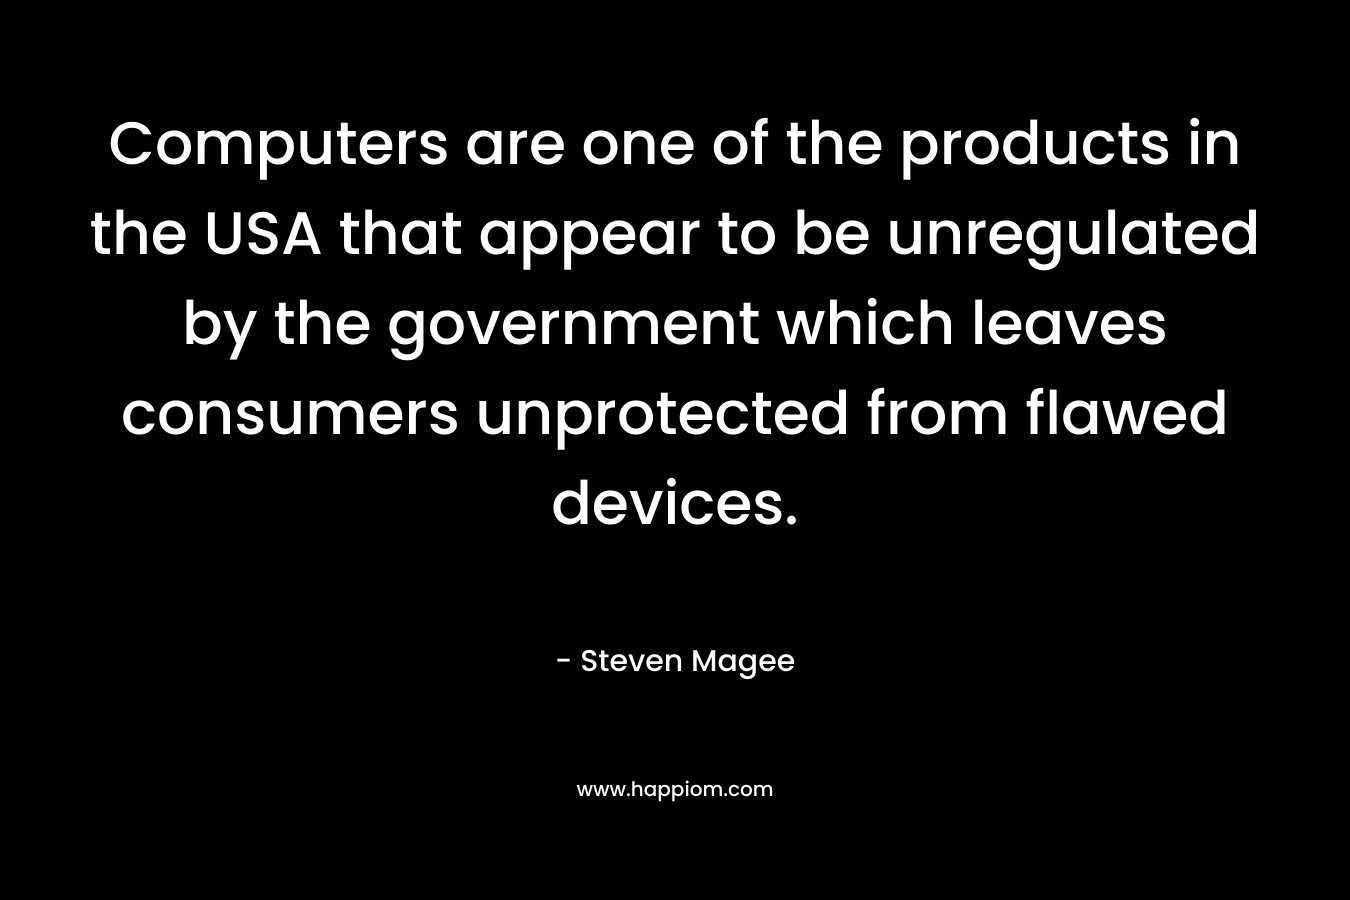 Computers are one of the products in the USA that appear to be unregulated by the government which leaves consumers unprotected from flawed devices.